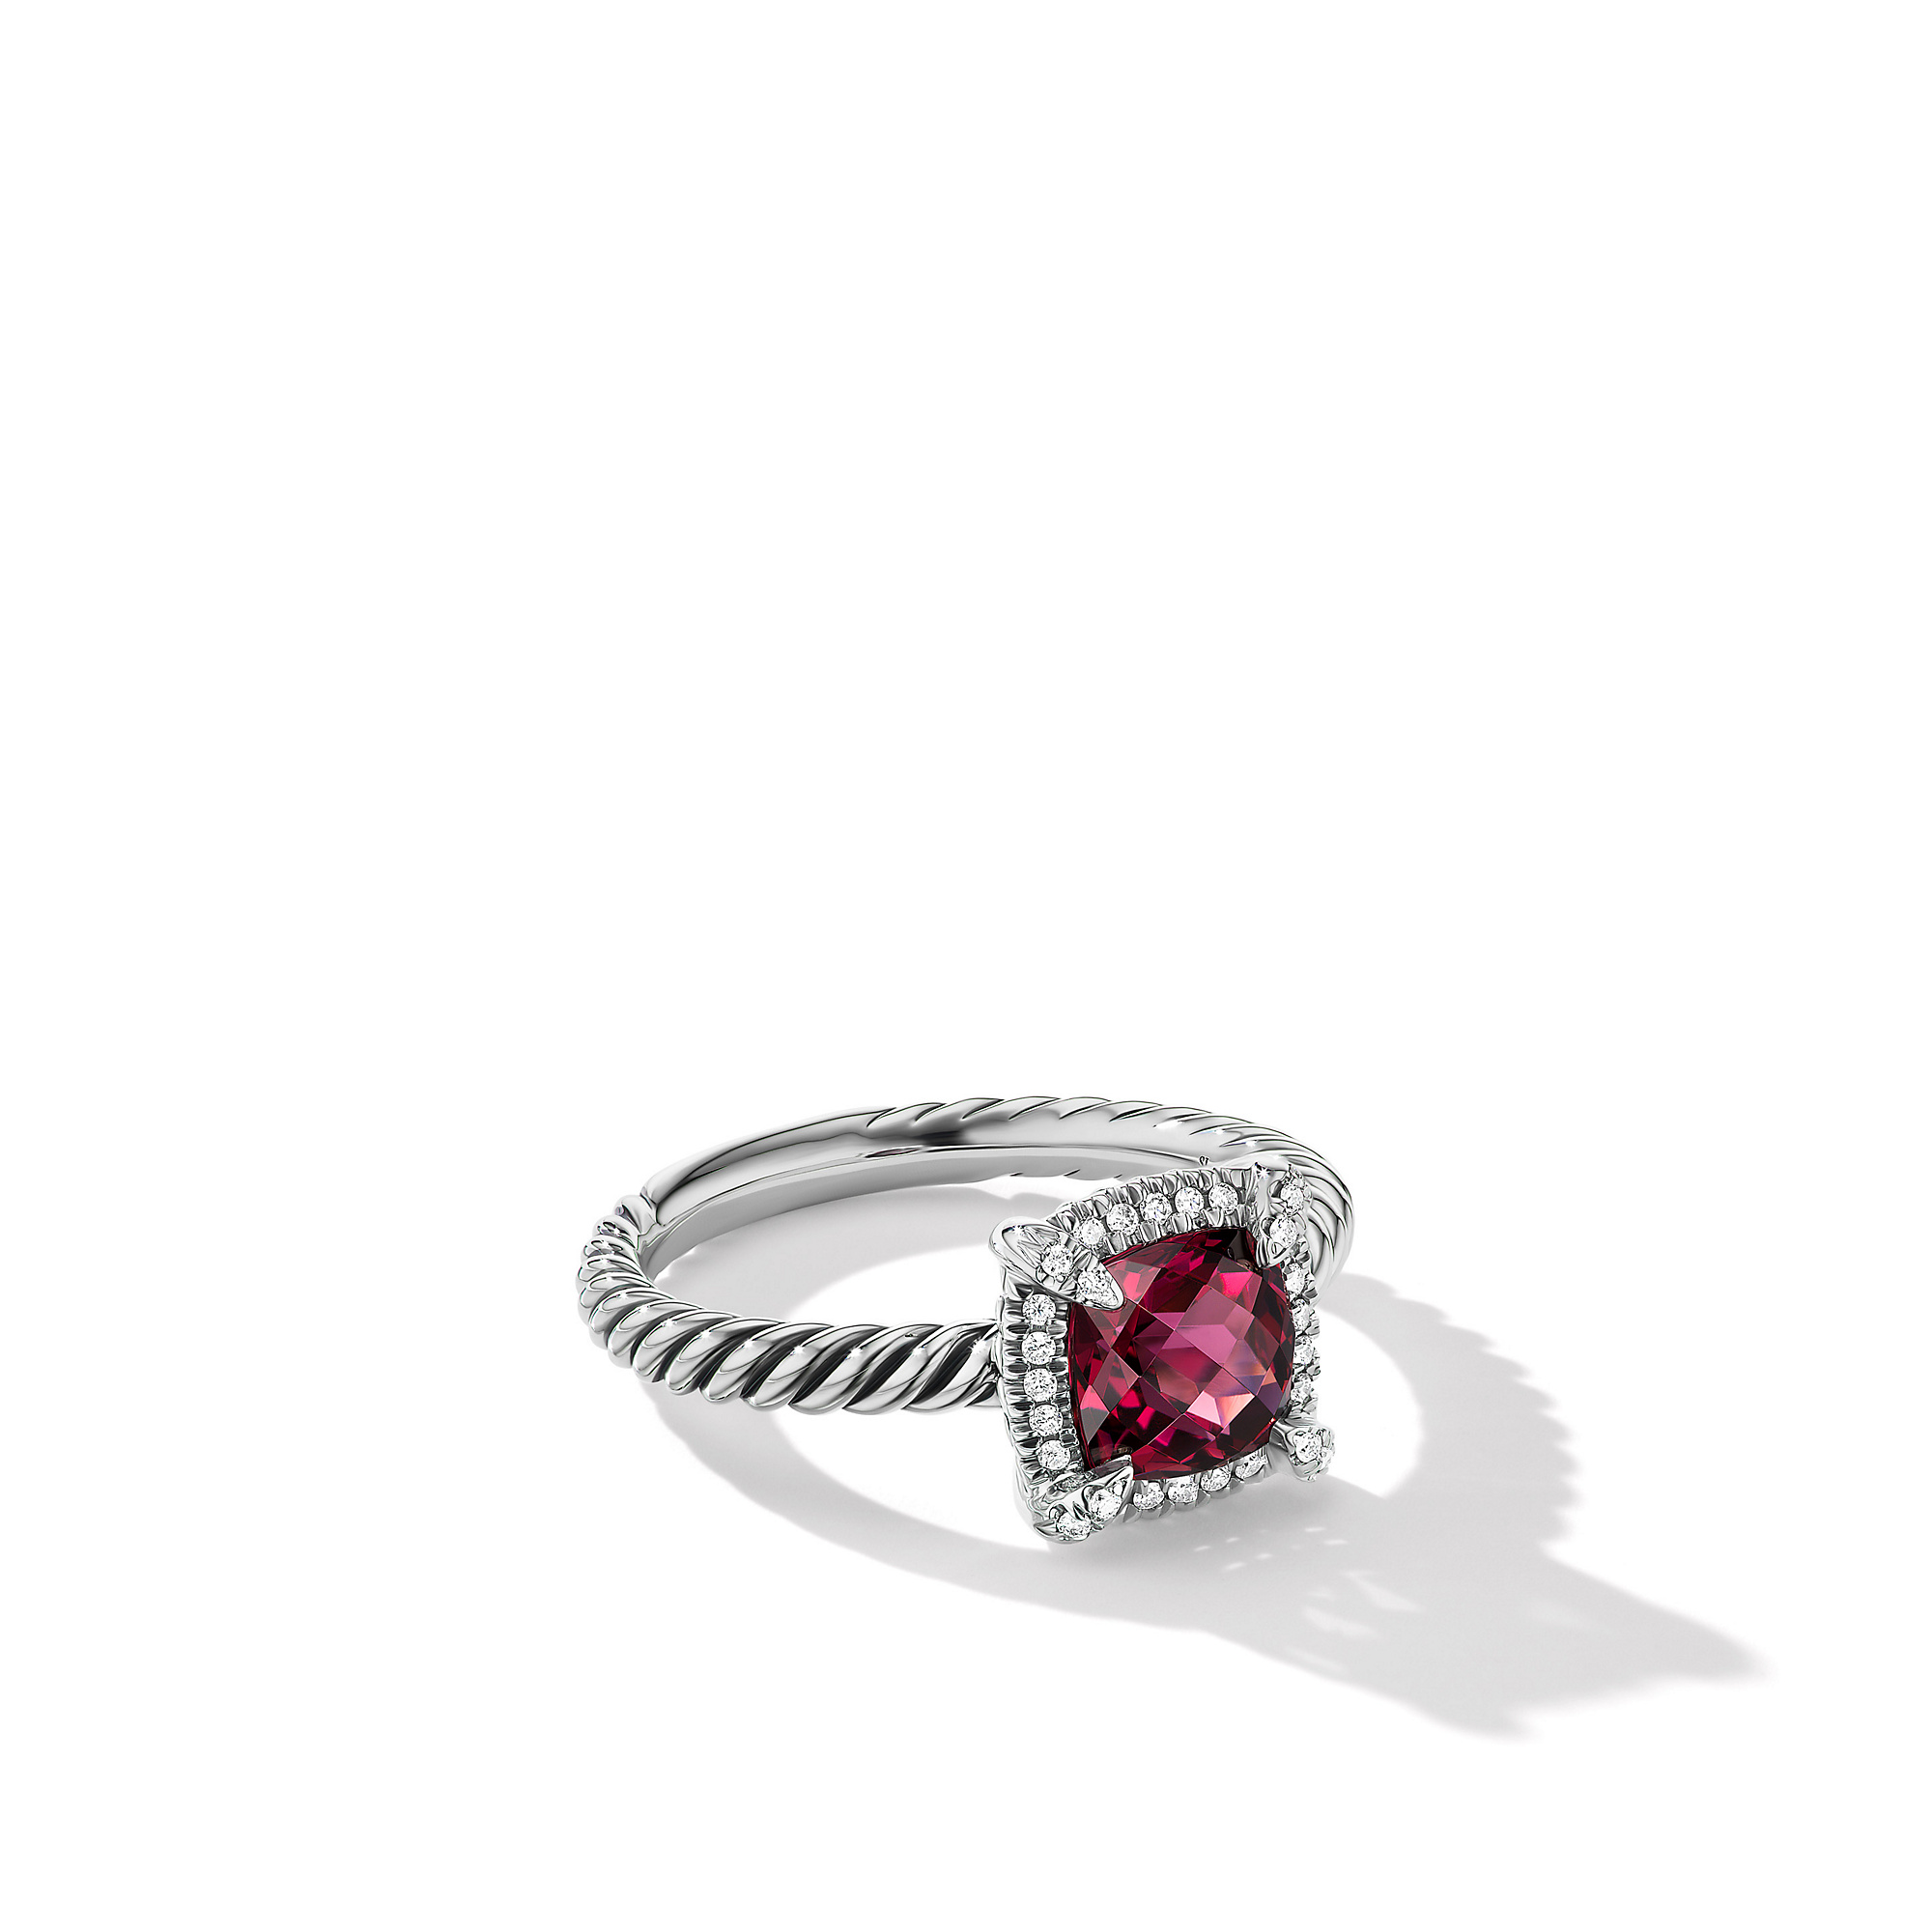 Petite Chatelaine® Pave Bezel Ring in Sterling Silver with Rhodolite Garnet and Diamonds